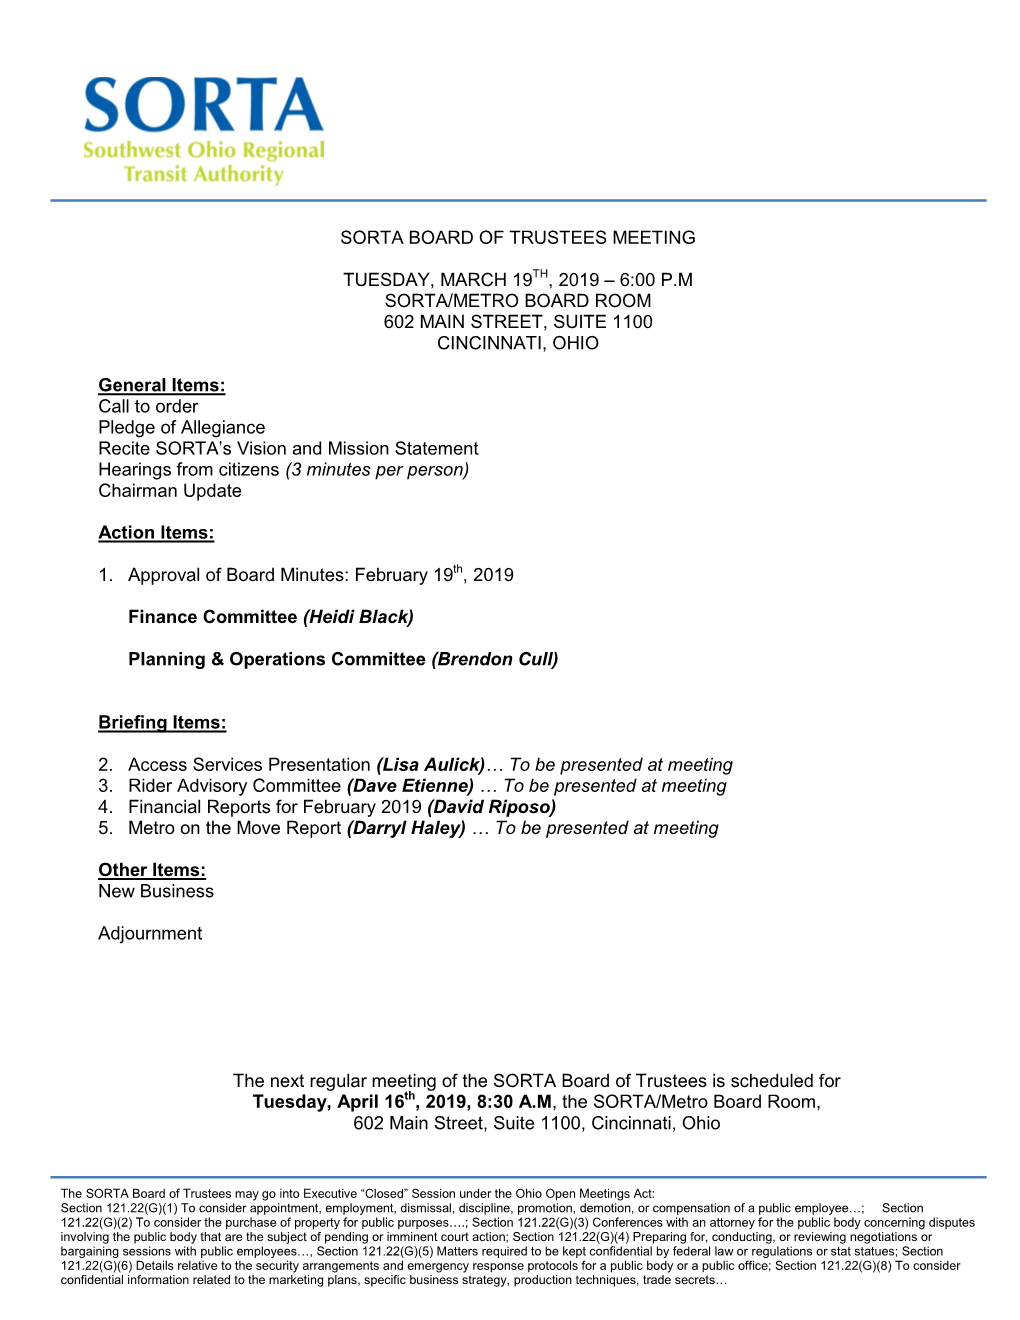 Sorta Board of Trustees Meeting Tuesday, March 19Th, 2019